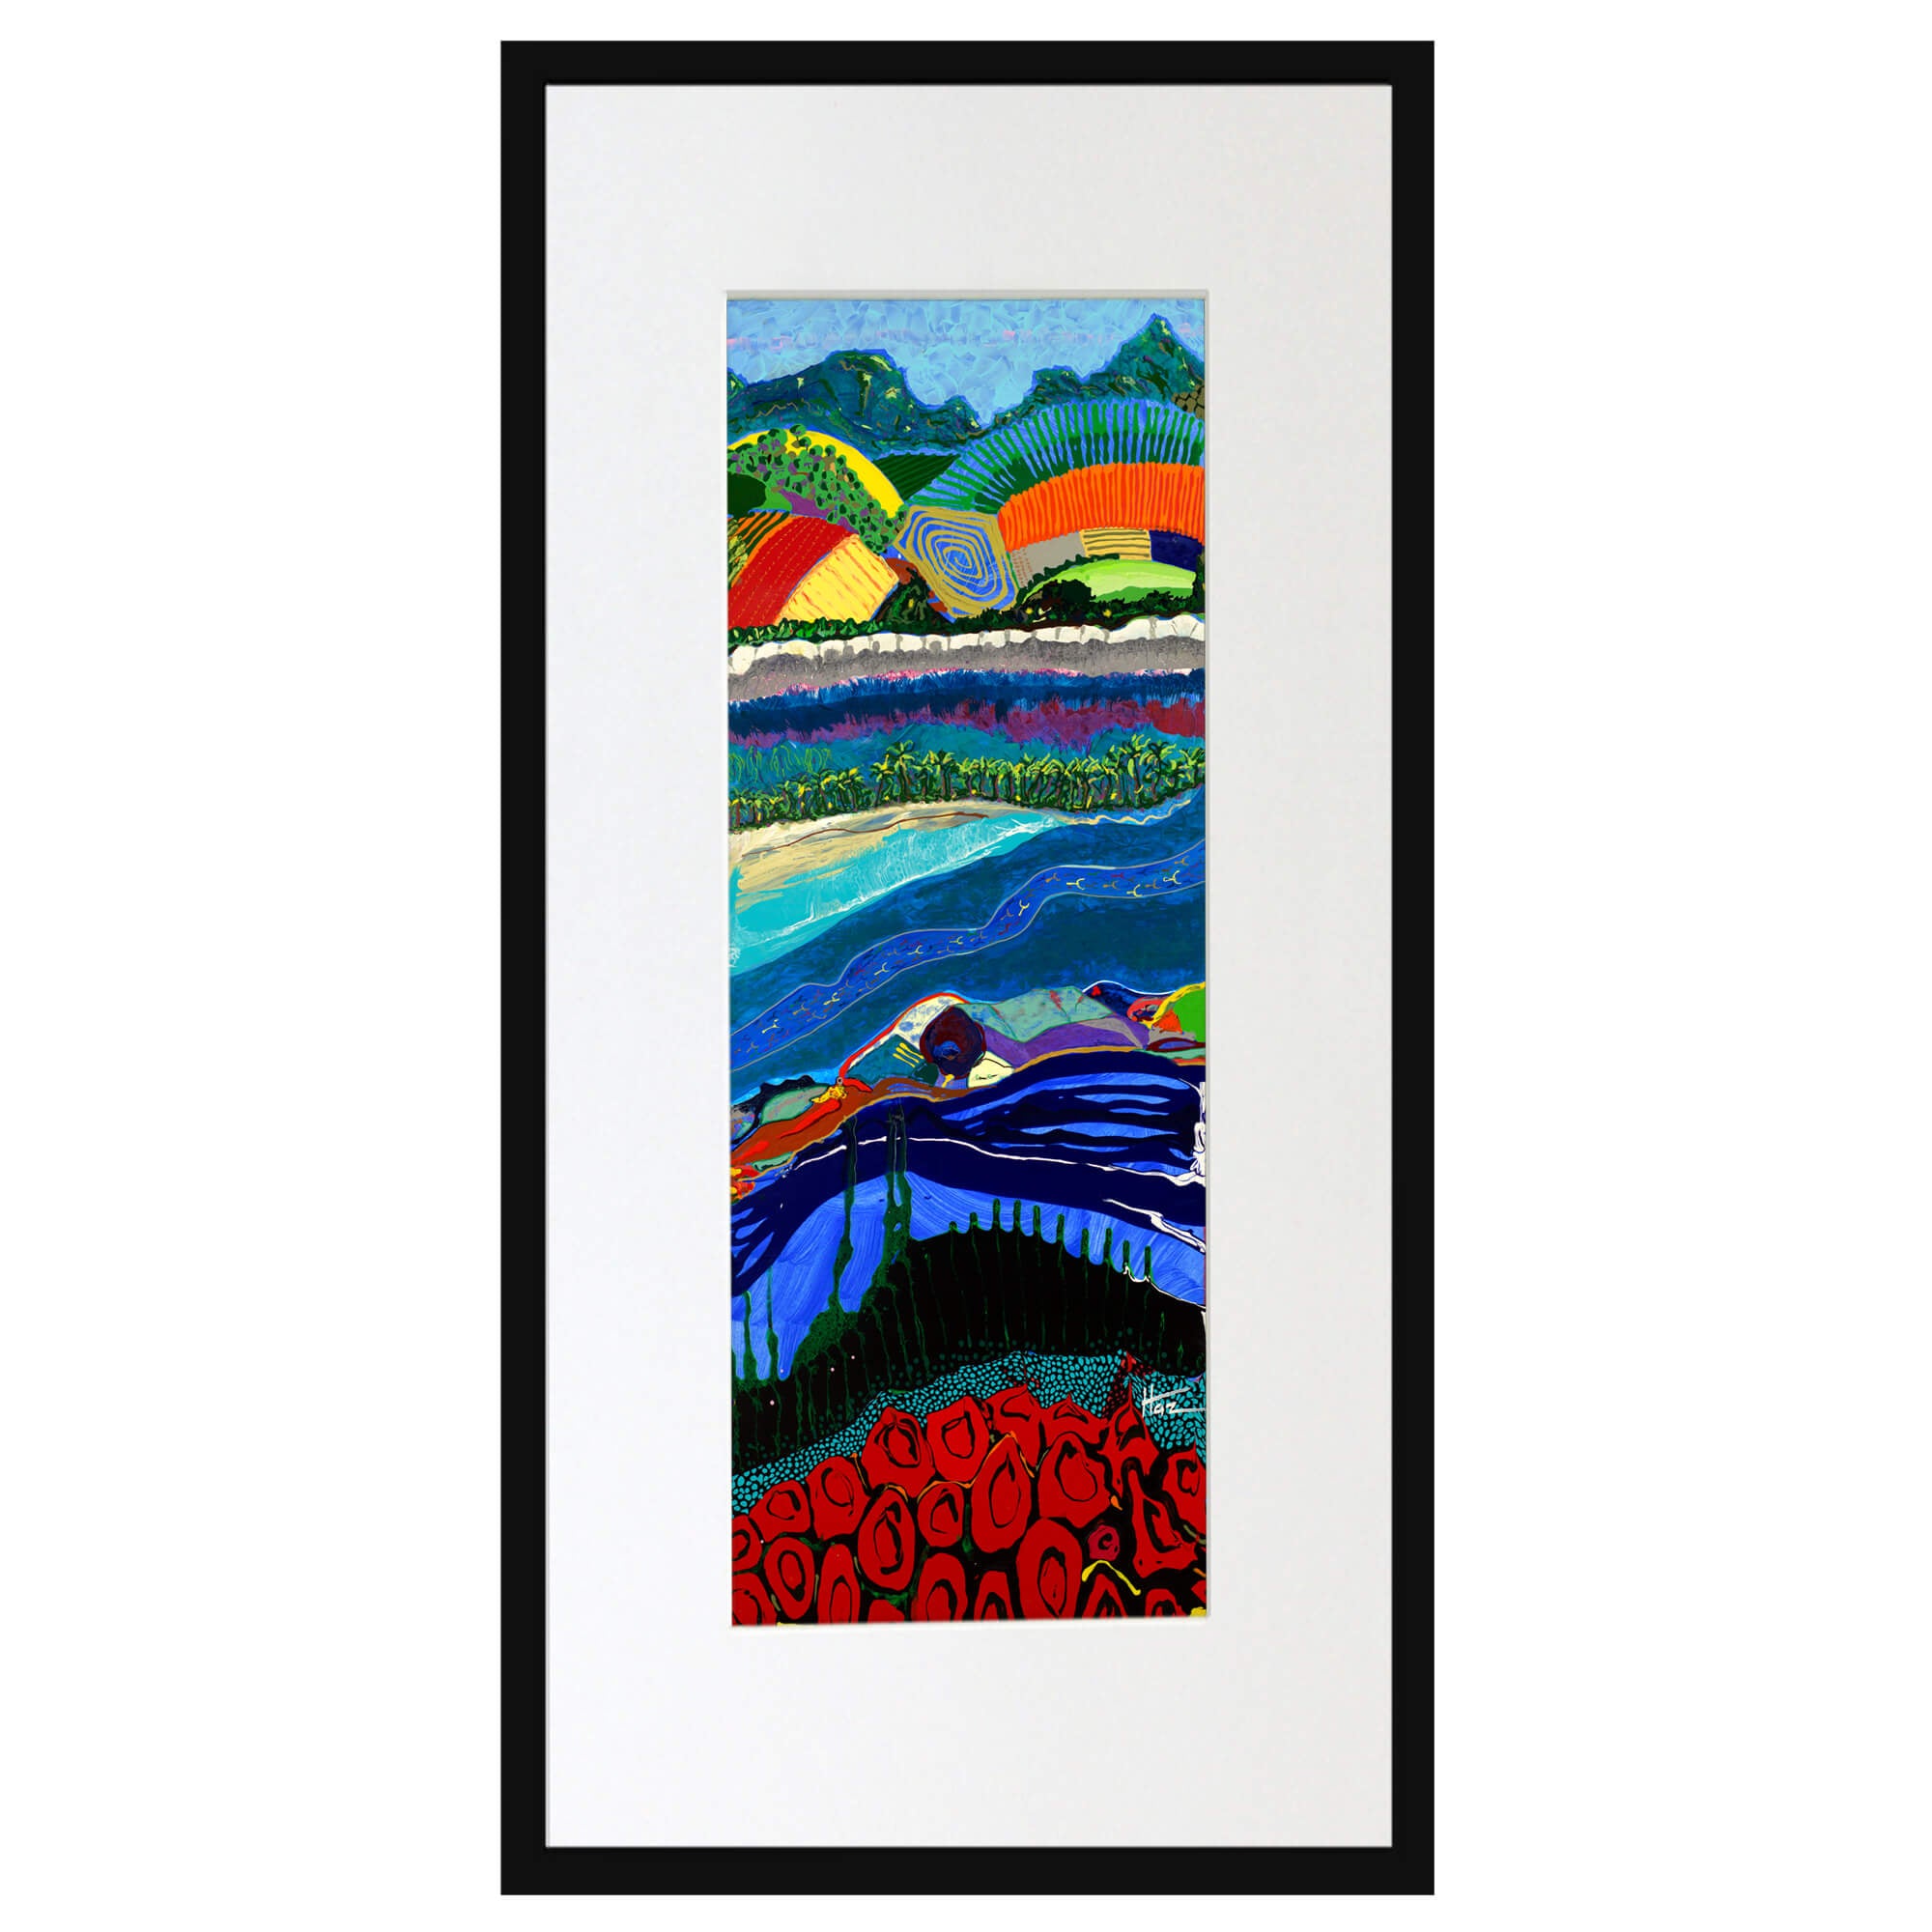 Matted art print with black frame featuring vibrant red roses by hawaii artist robert hazzard